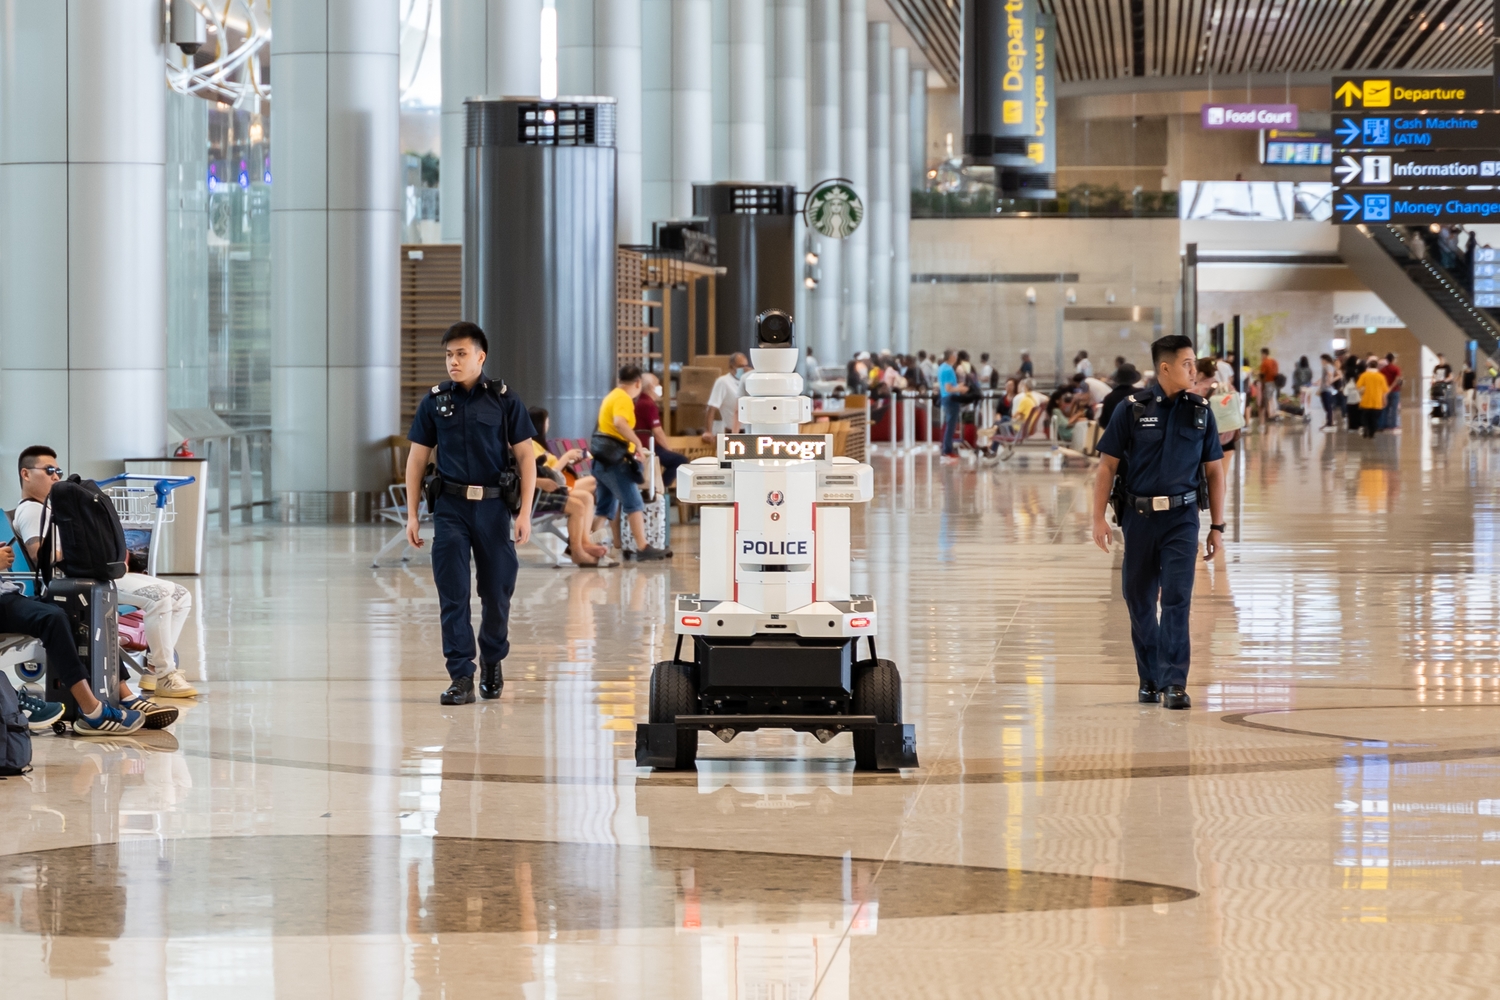 The SPF patrol robot in action at Changi Airport Terminal 4 with 2 police officers accompanying it on each side.